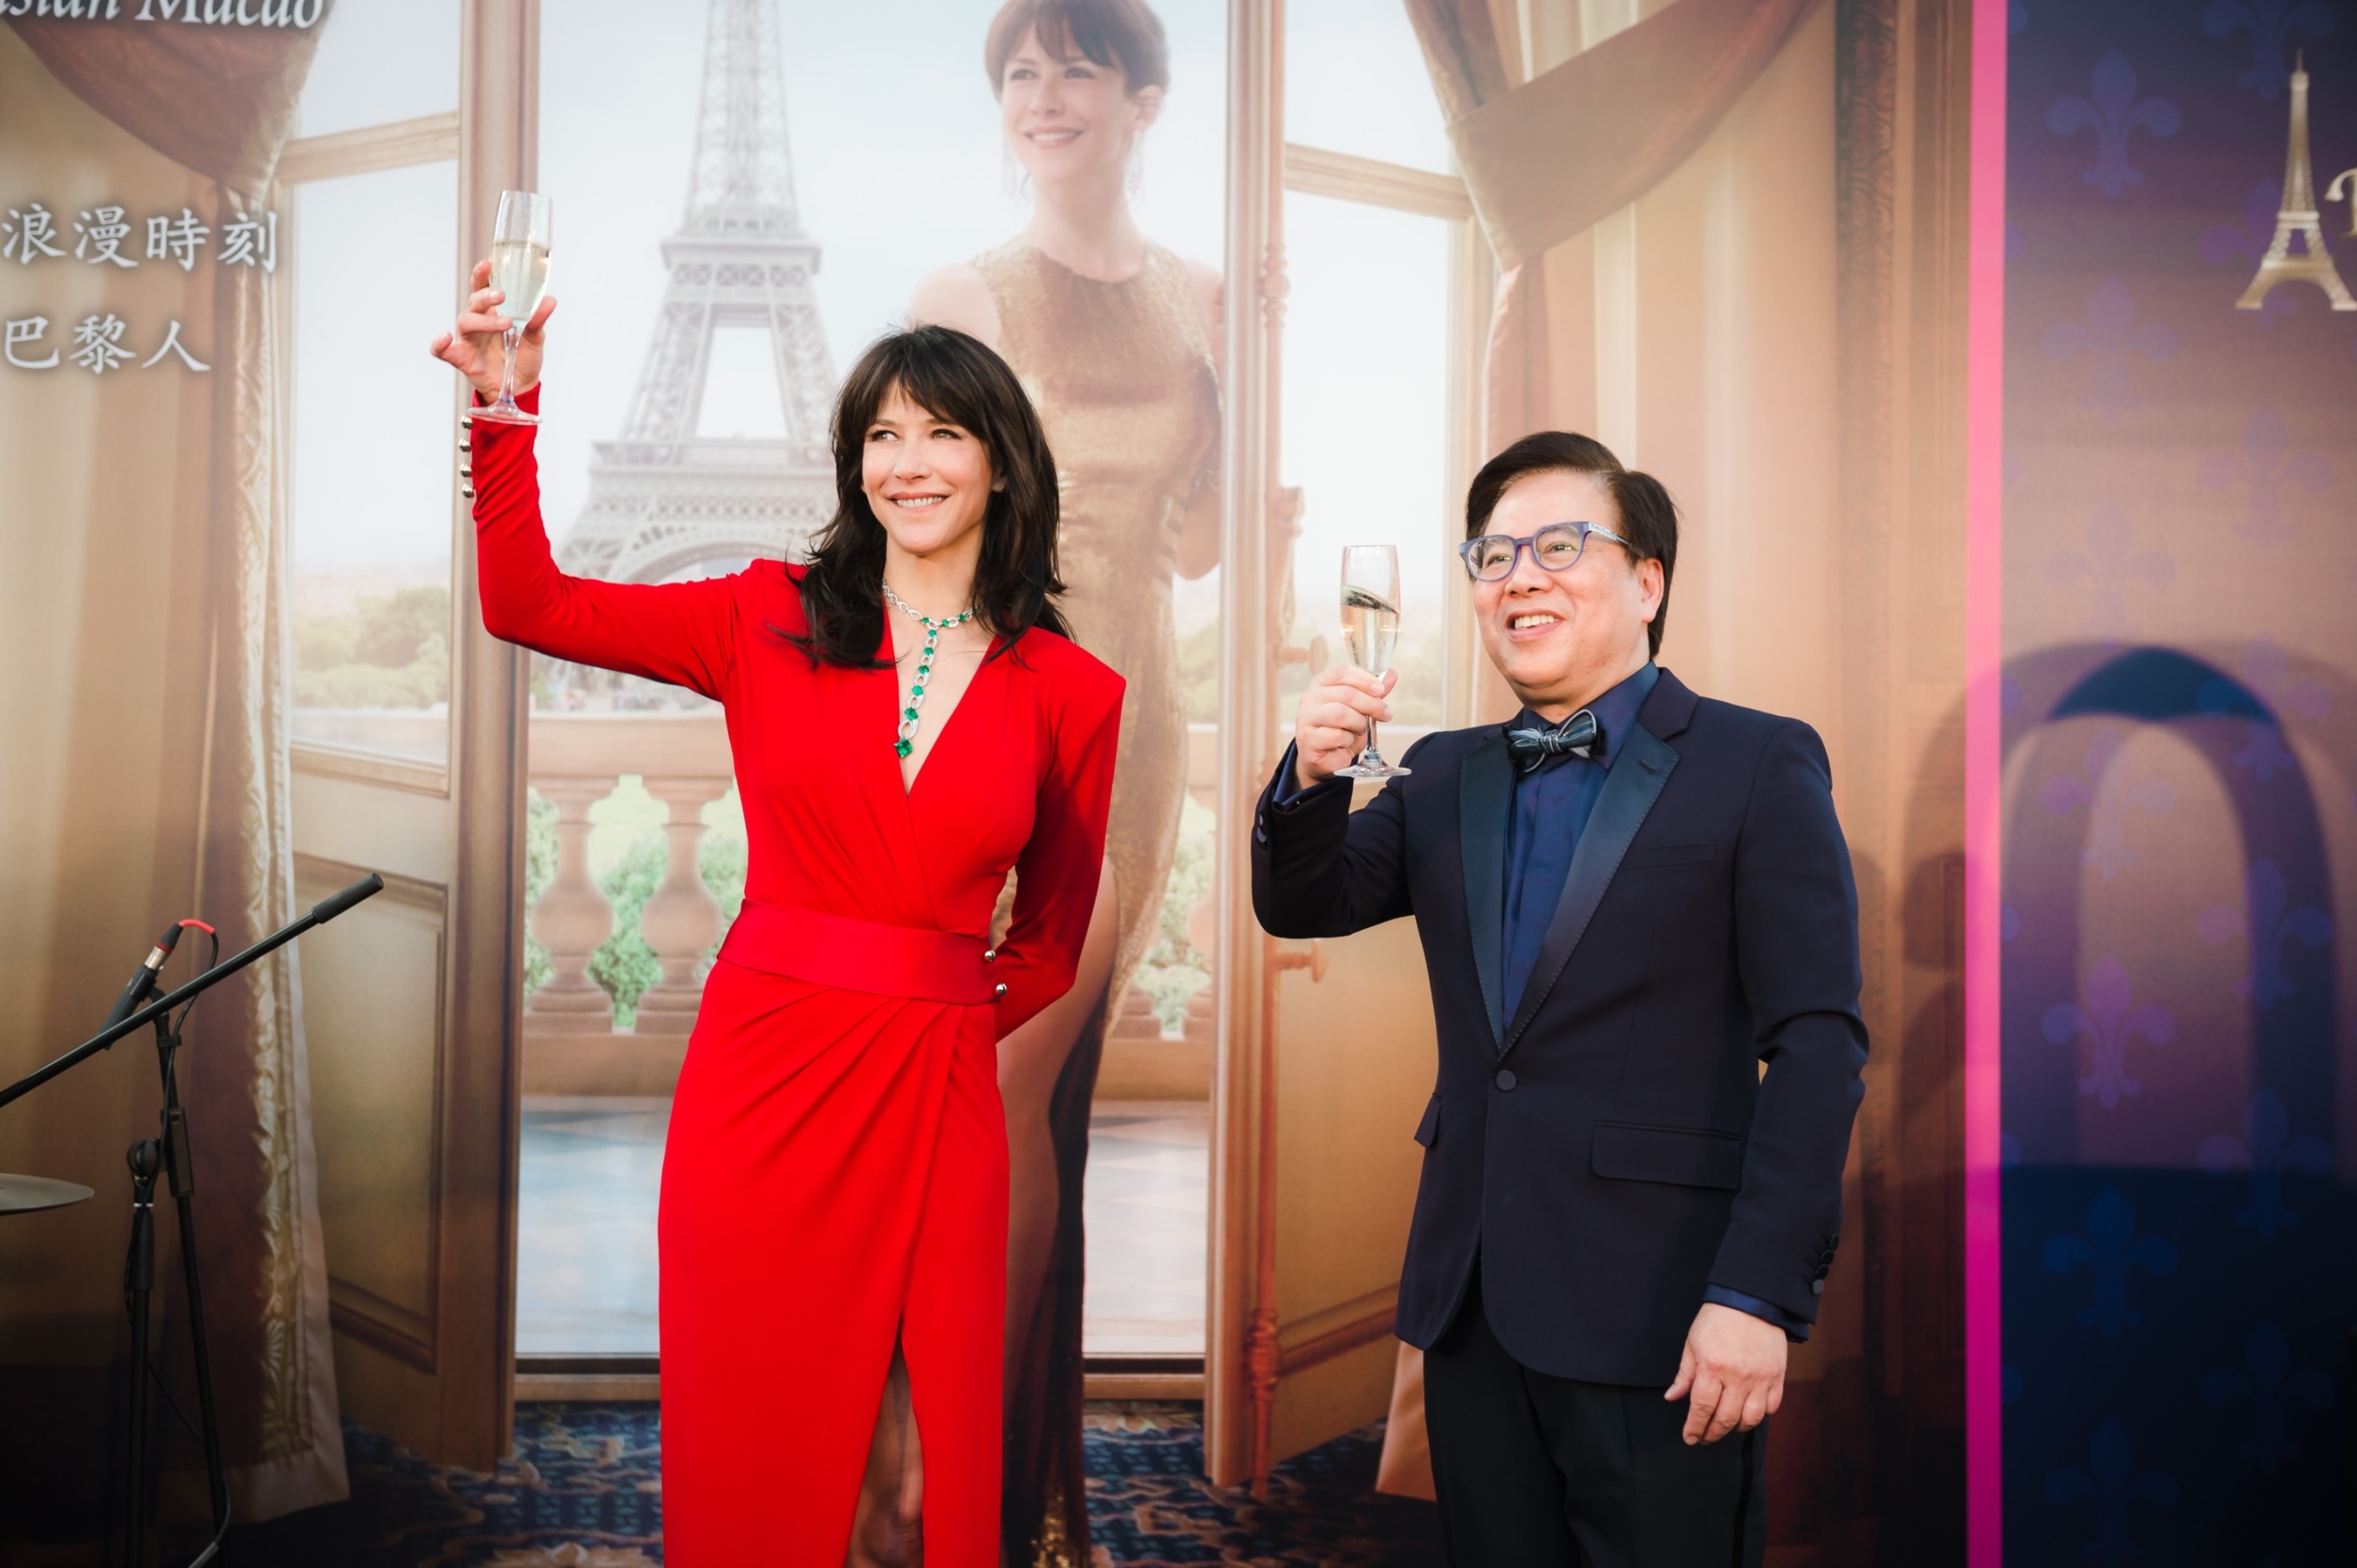 Celebration with Sophie Marceau at the Parisian Macao